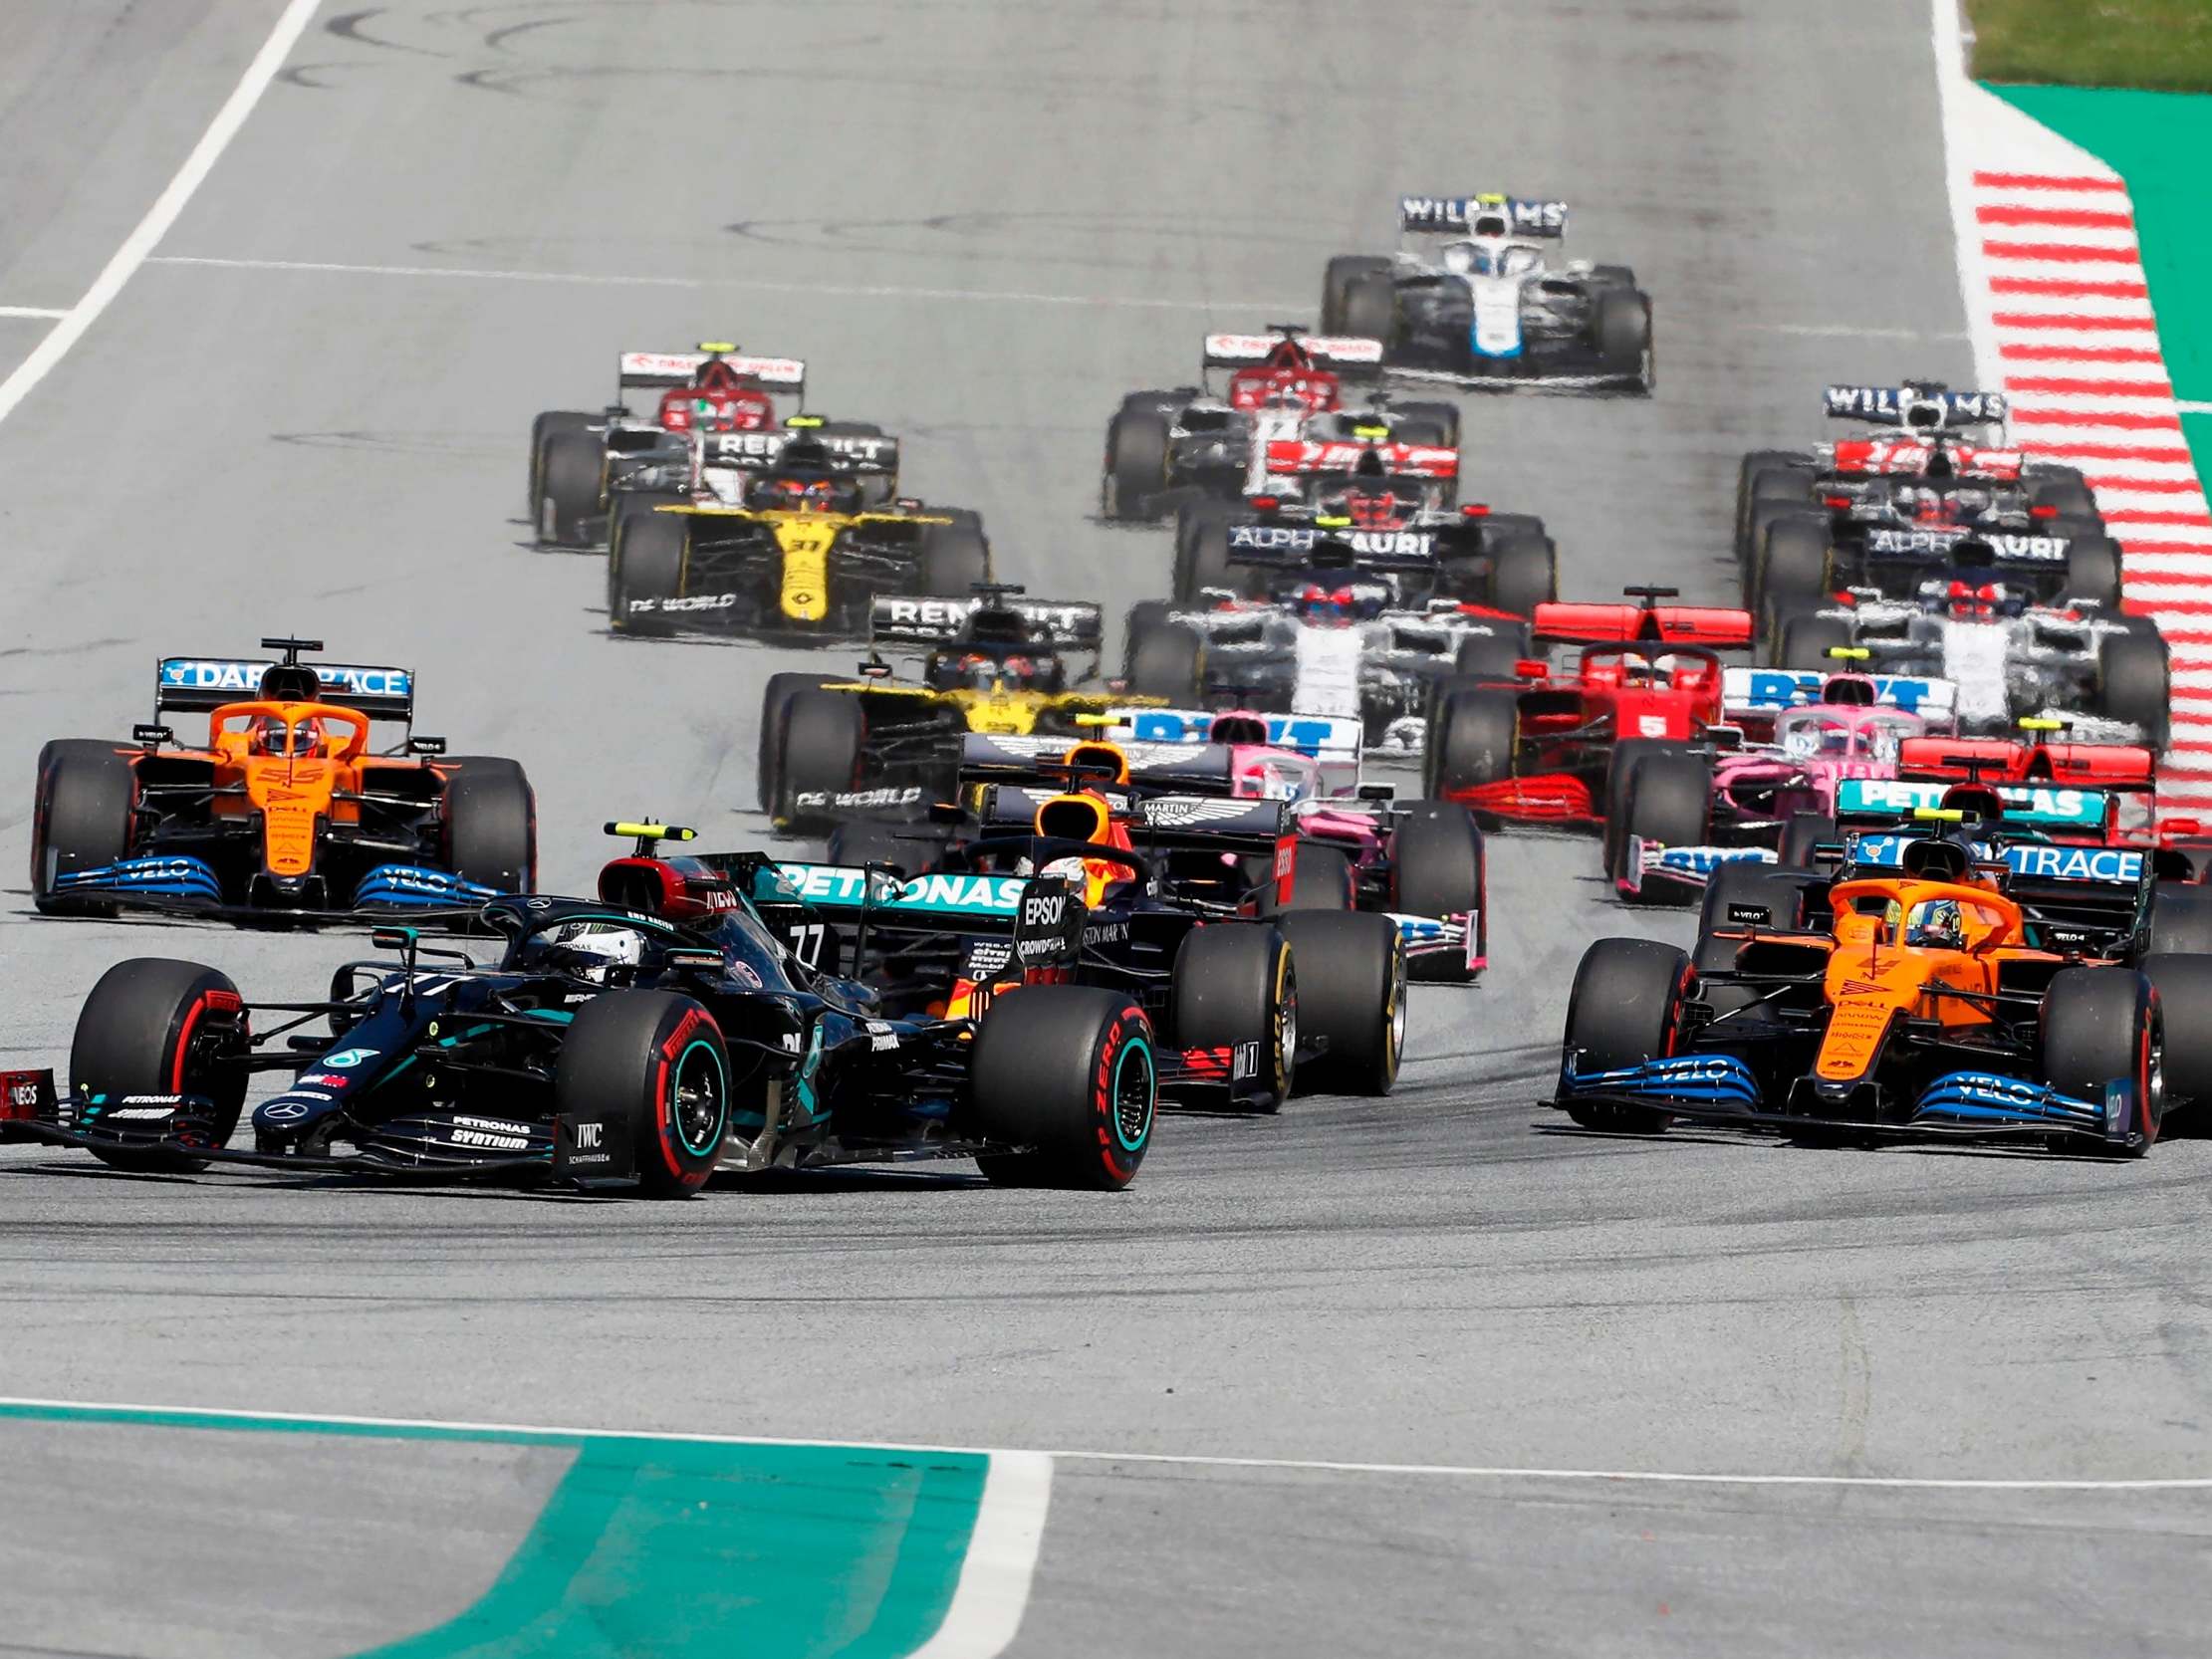 Valtteri Bottas leads the field at the start of the Austrian Grand Prix